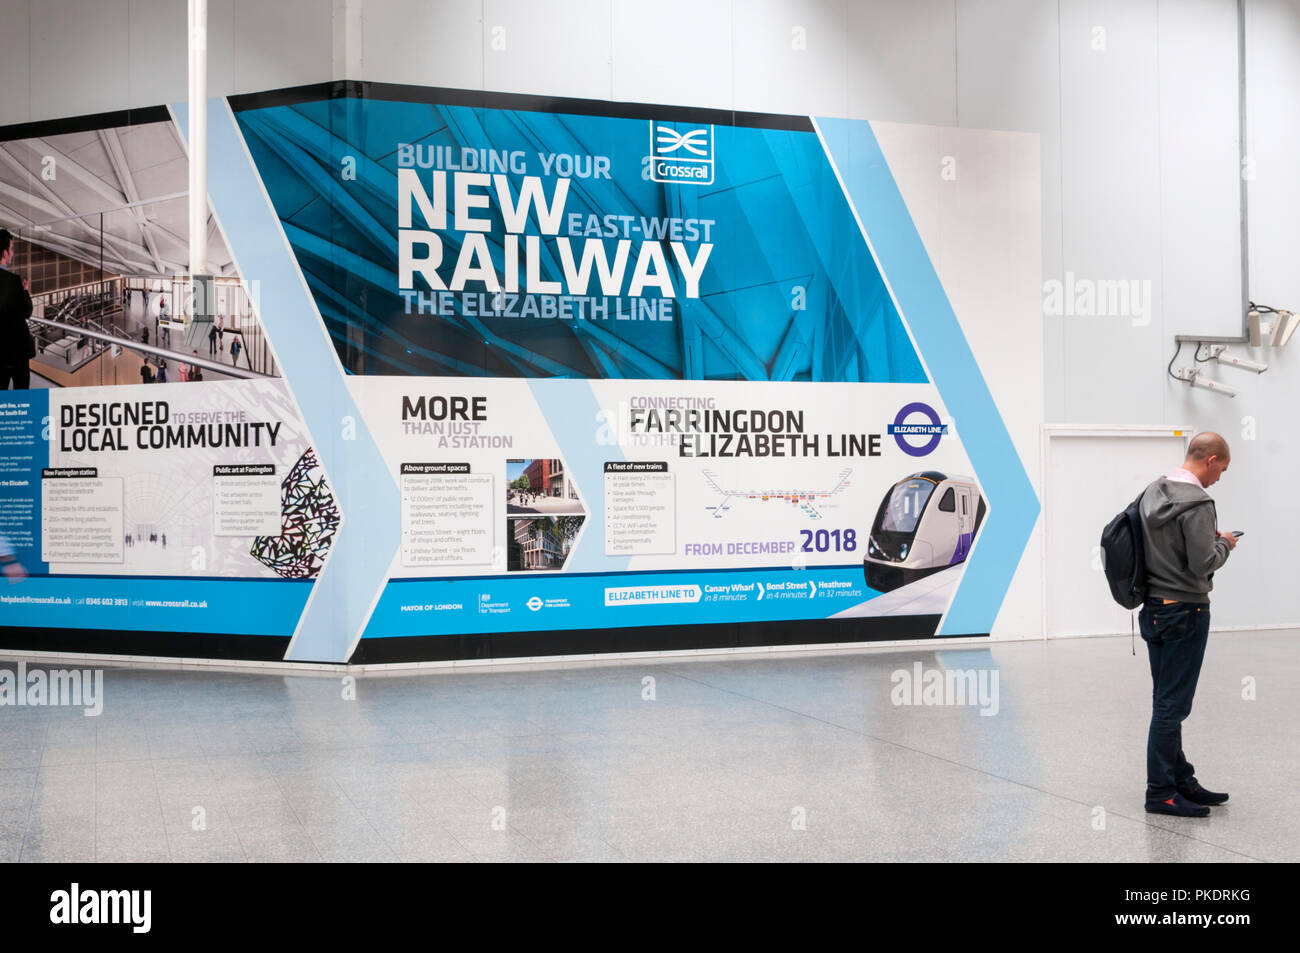 A display about the new Elizabeth Line, part of Crossrail, at Farringdon Station, London. Stock Photo